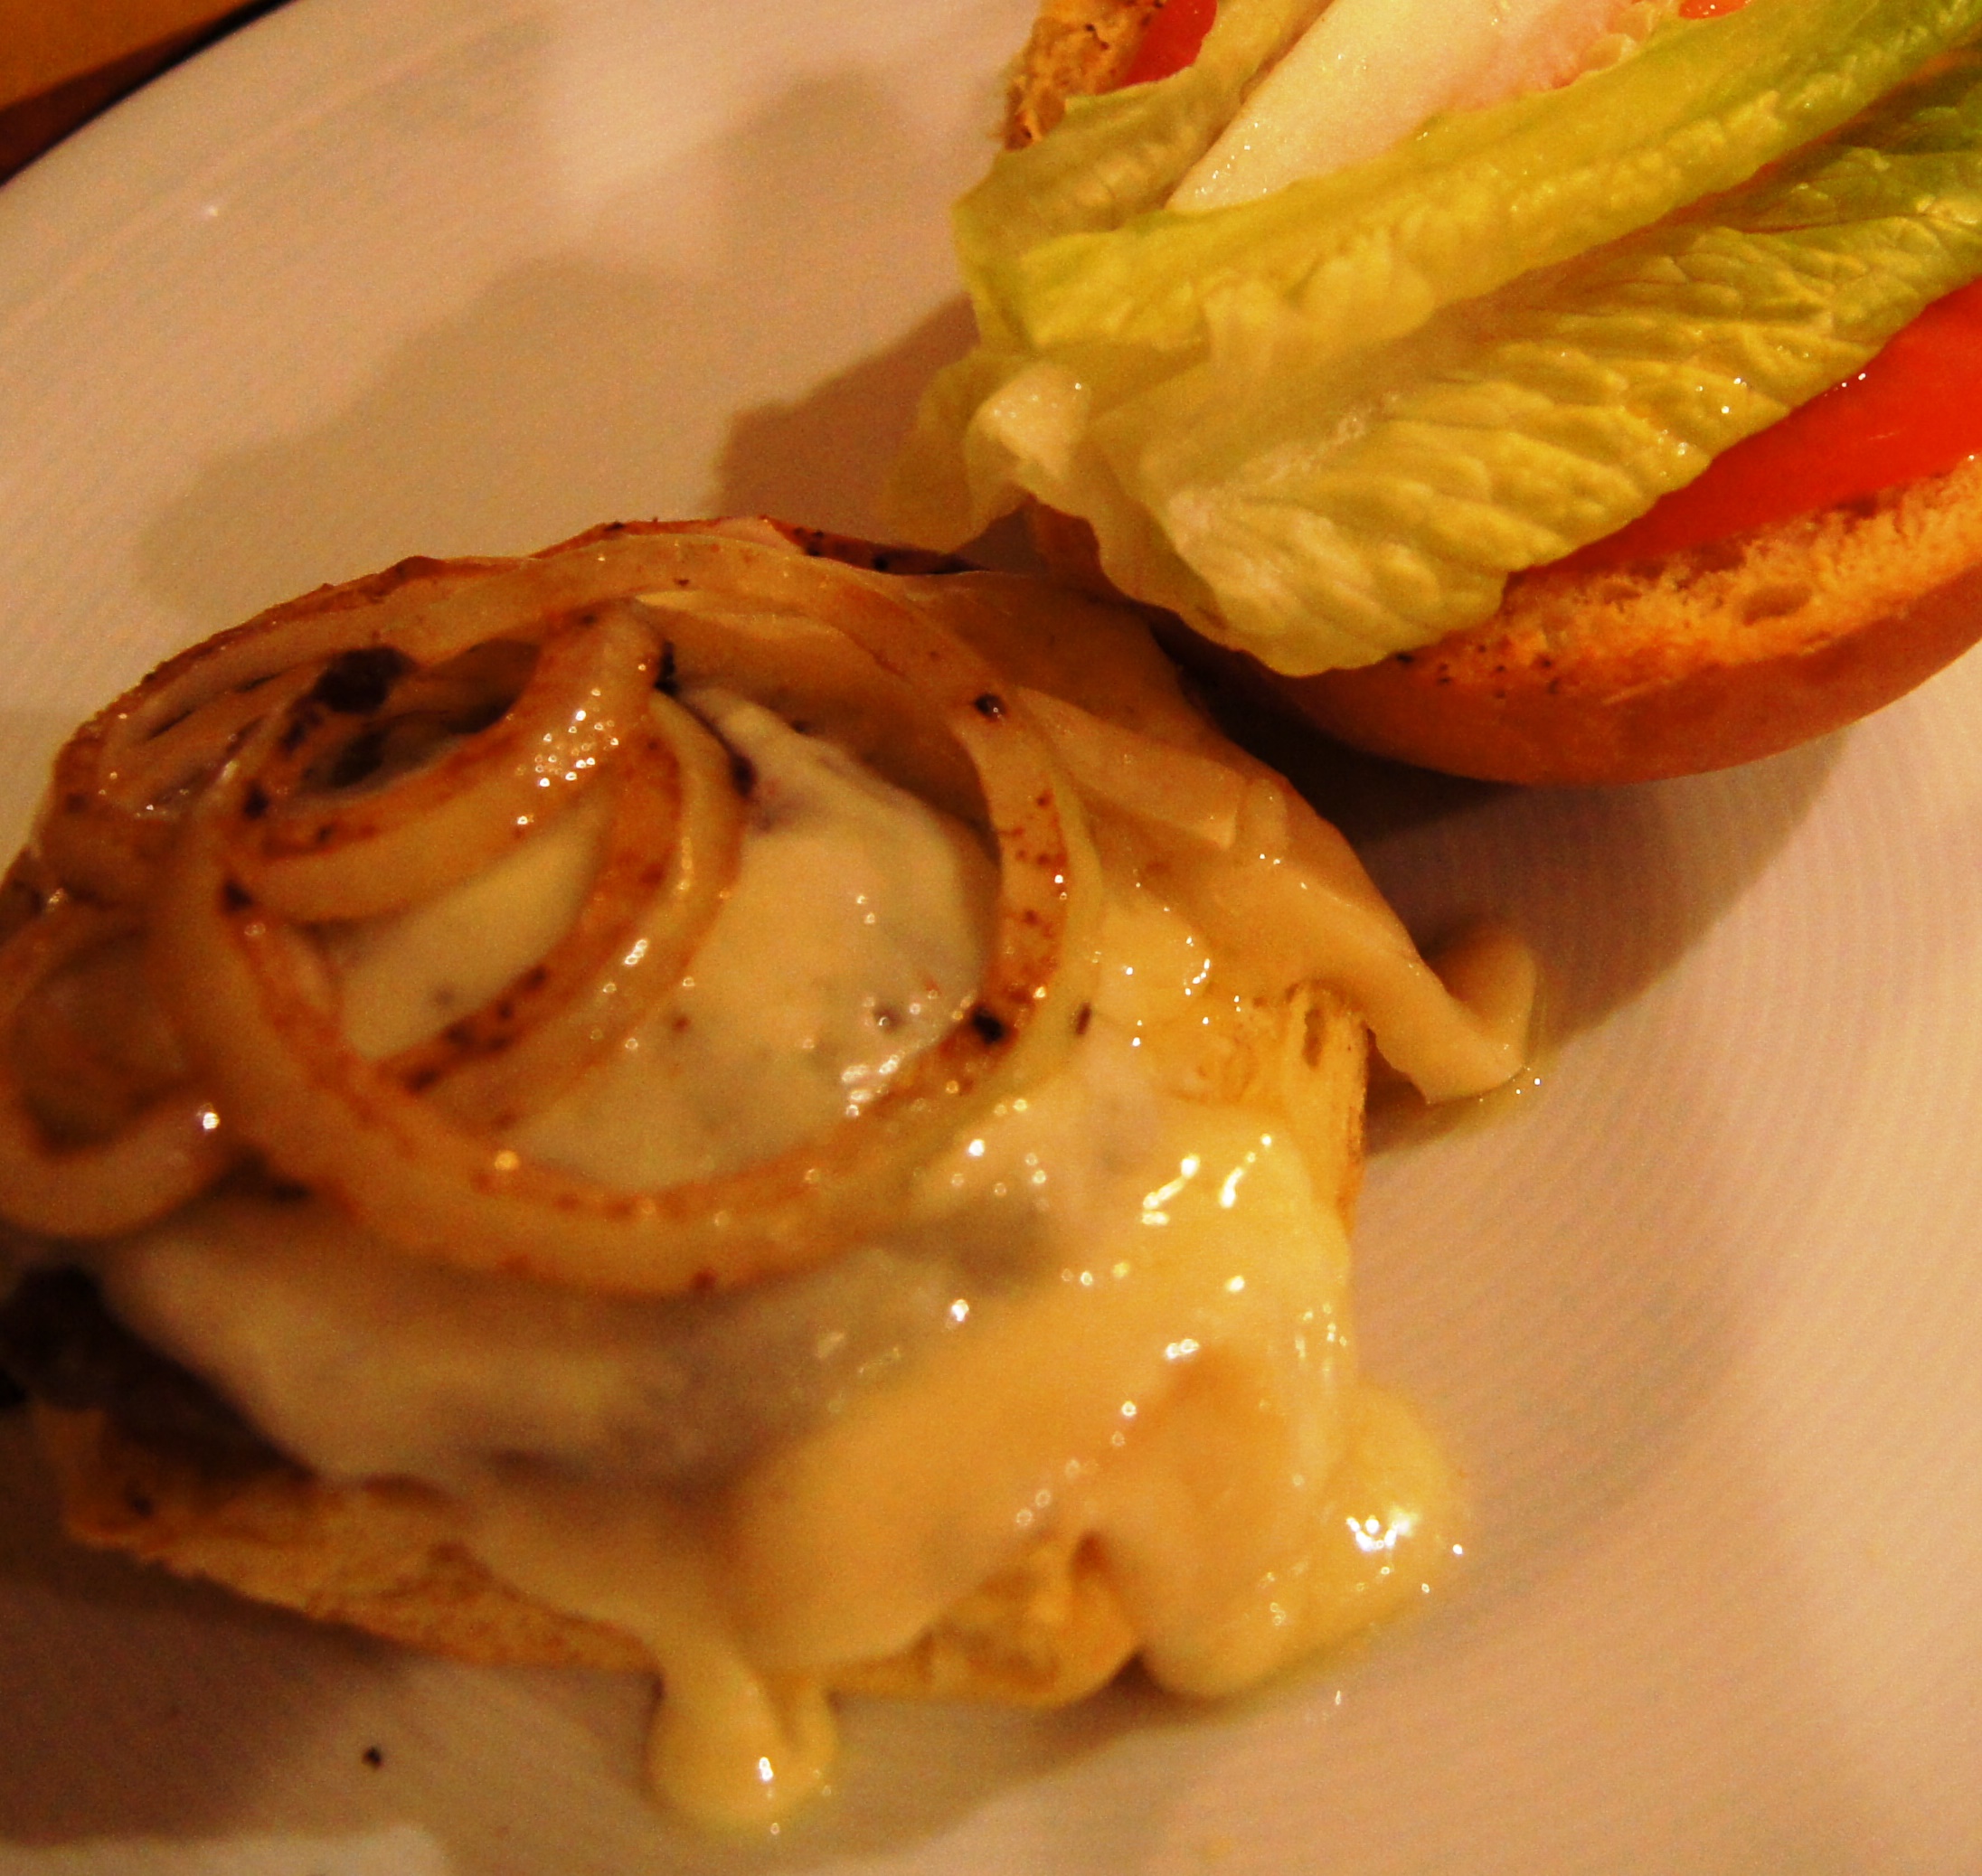 Racletteburger – the indoor burger on the Raclette Grill